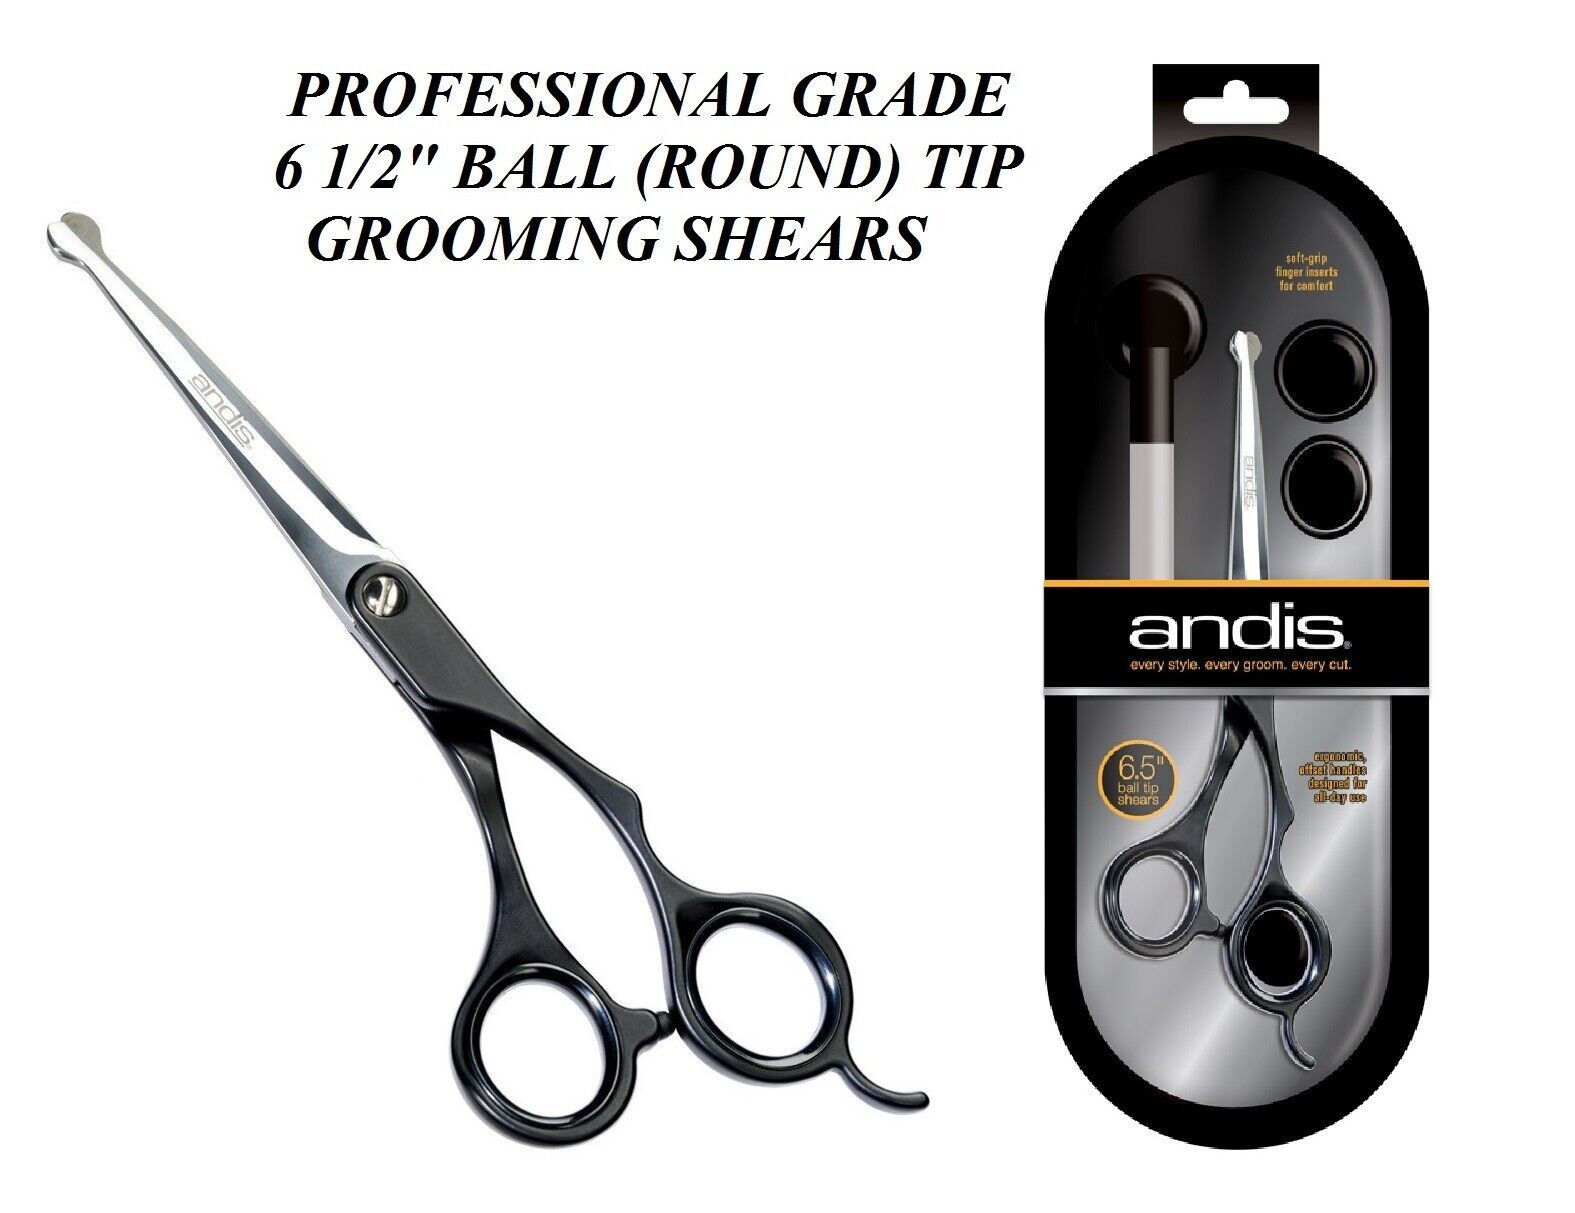 ANDIS Japanese Stainless Steel PRO Grooming 6 1/2" BALL SAFETY Tip SHEAR Scissor - $89.99